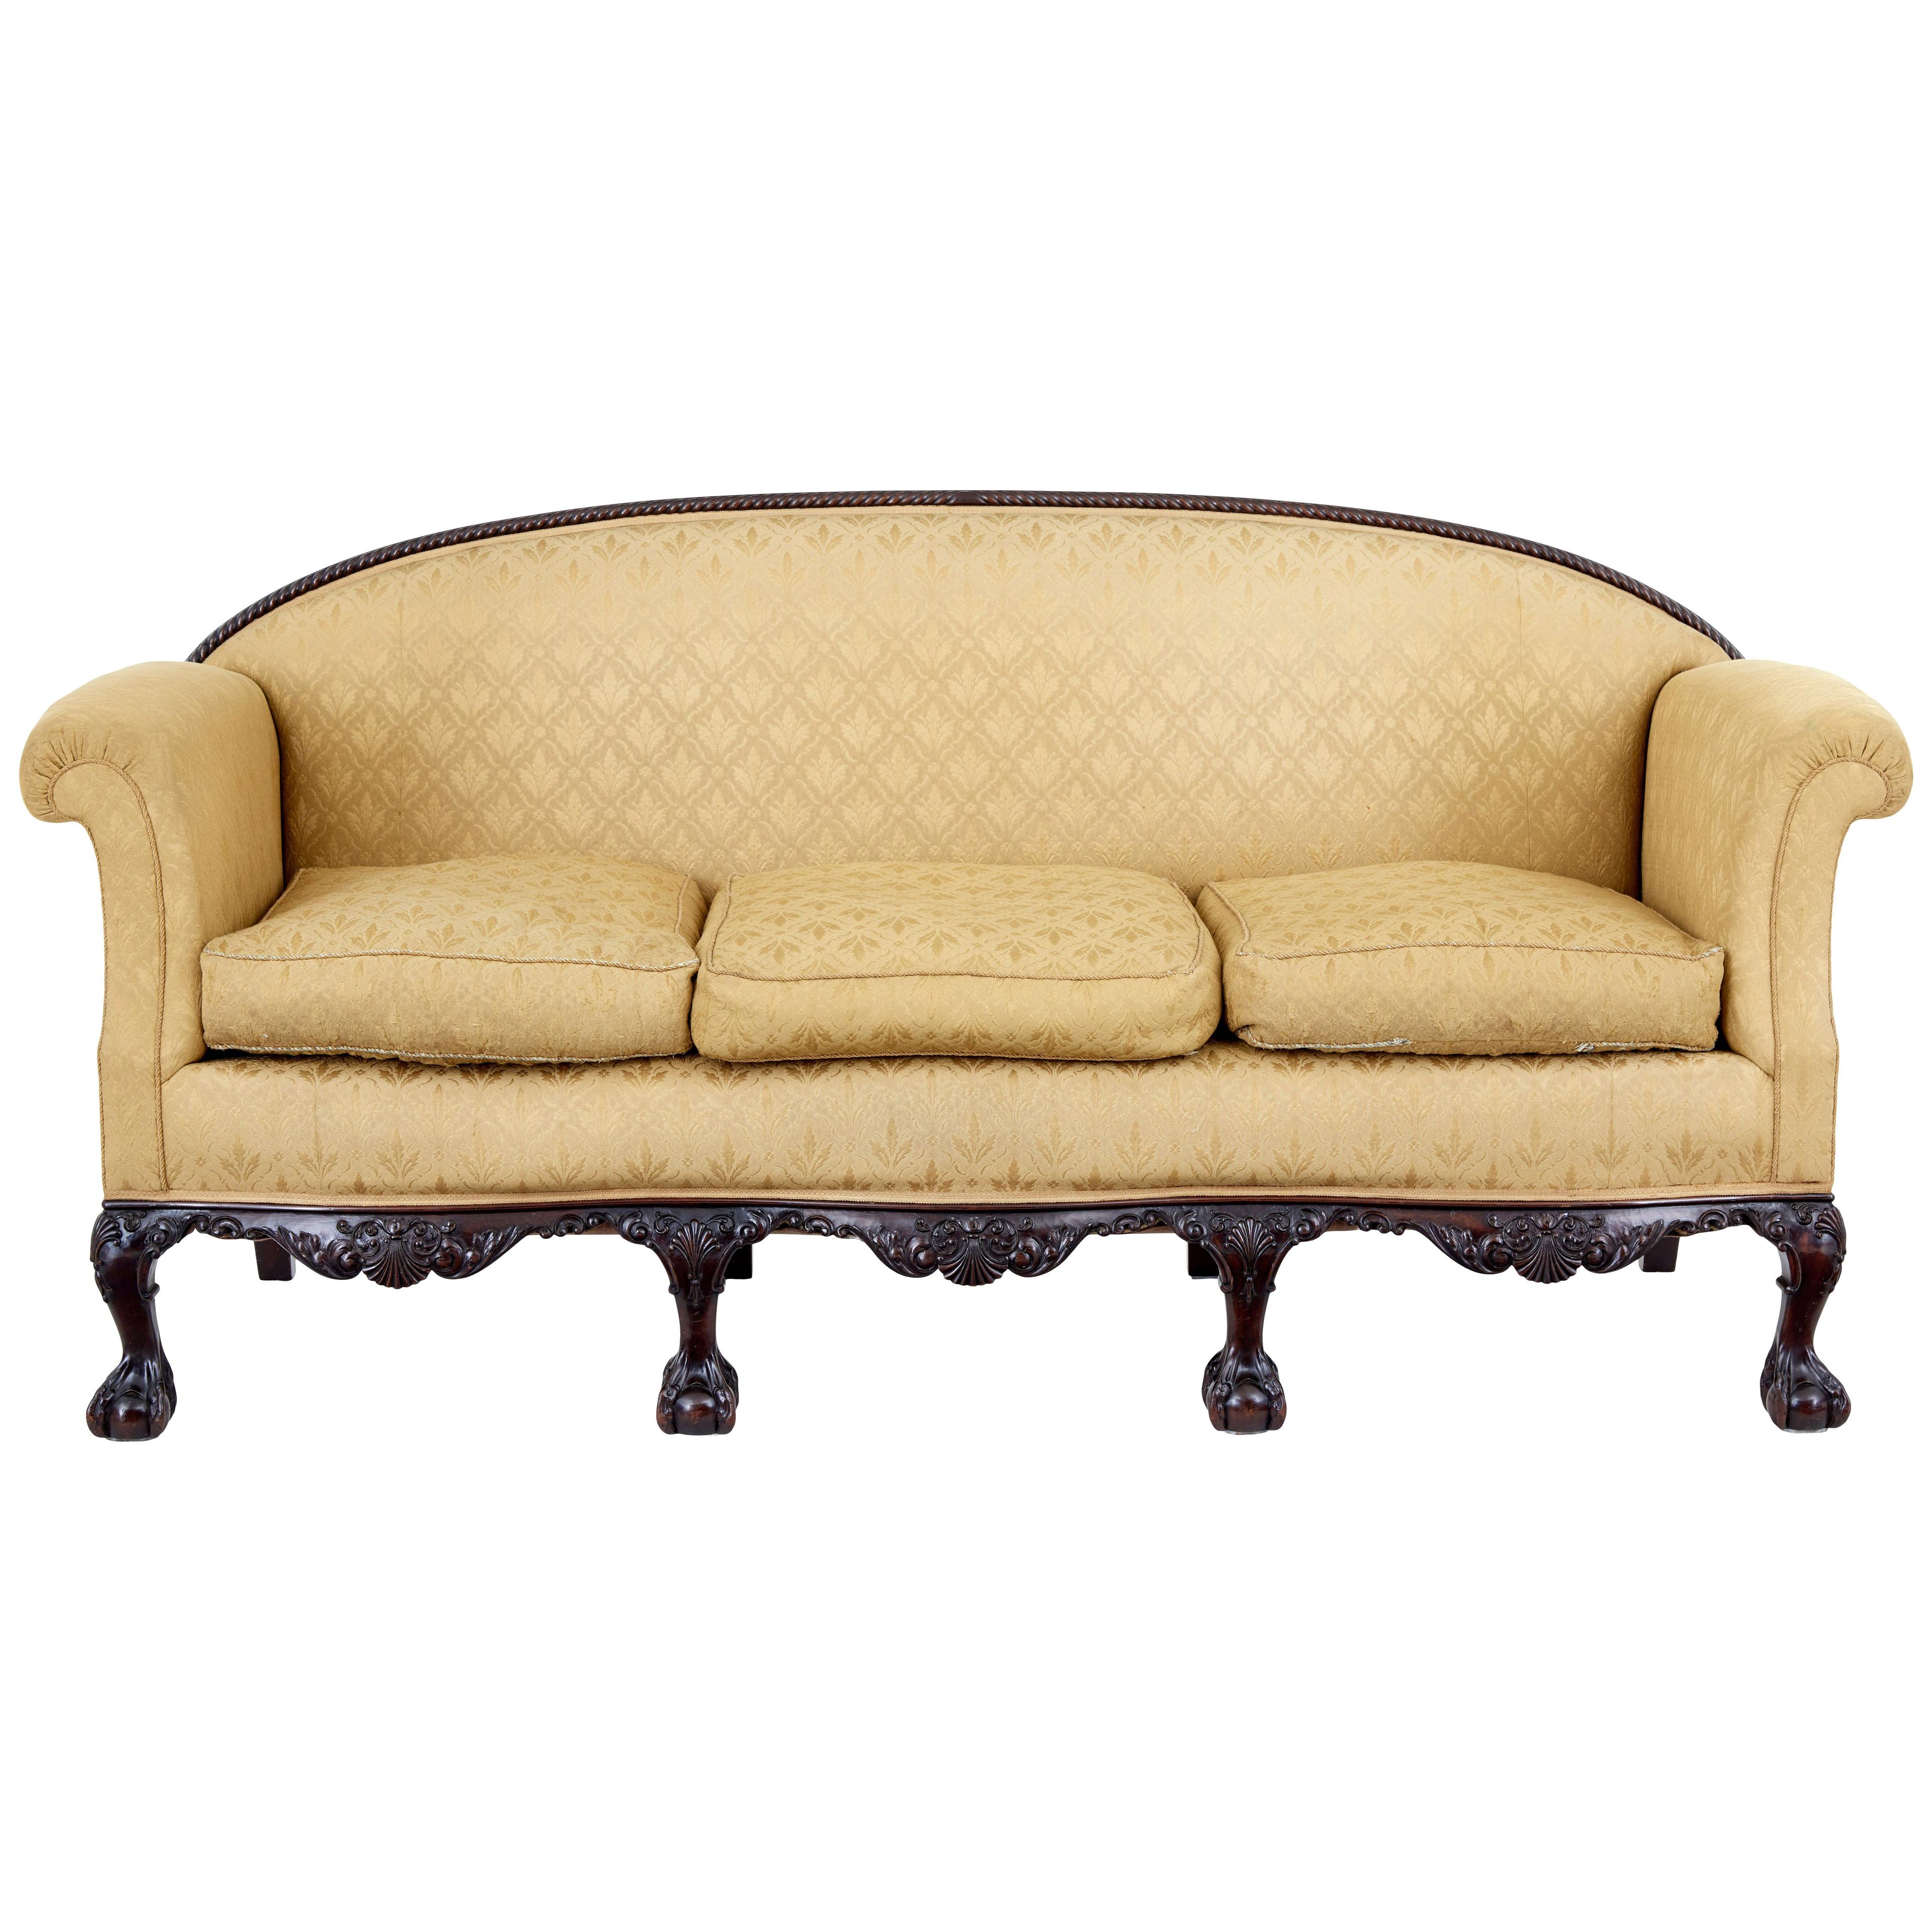 EARLY 20TH CENTURY CHIPPENDALE REVIVAL CARVED MAHOGANY SOFA